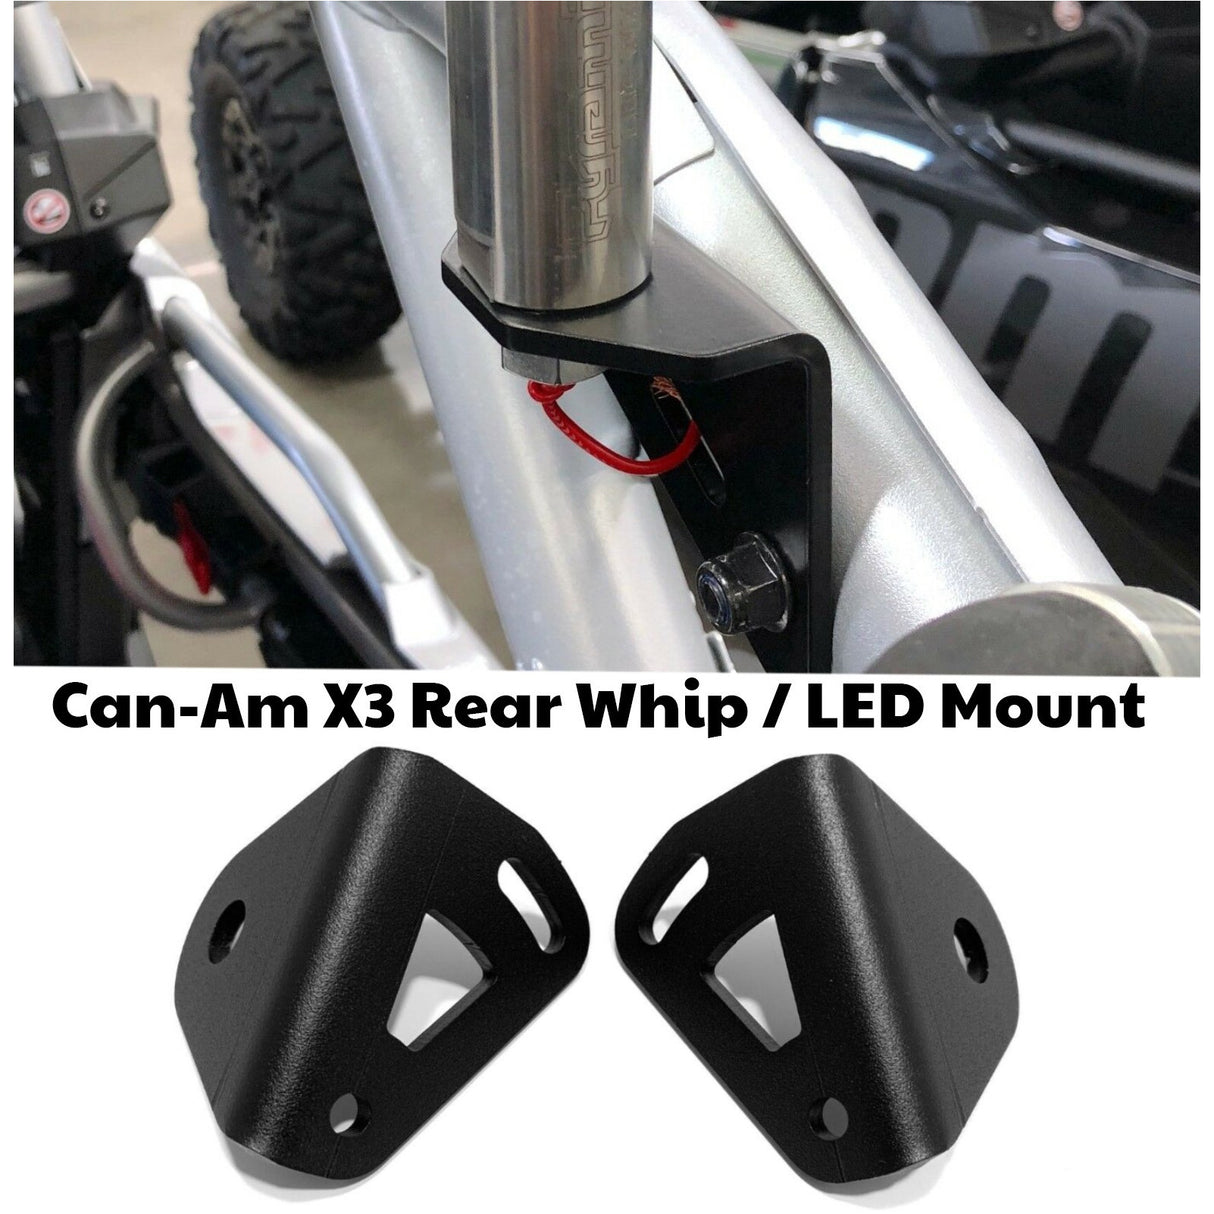 Can-Am X3 Rear Whip / LED Mount